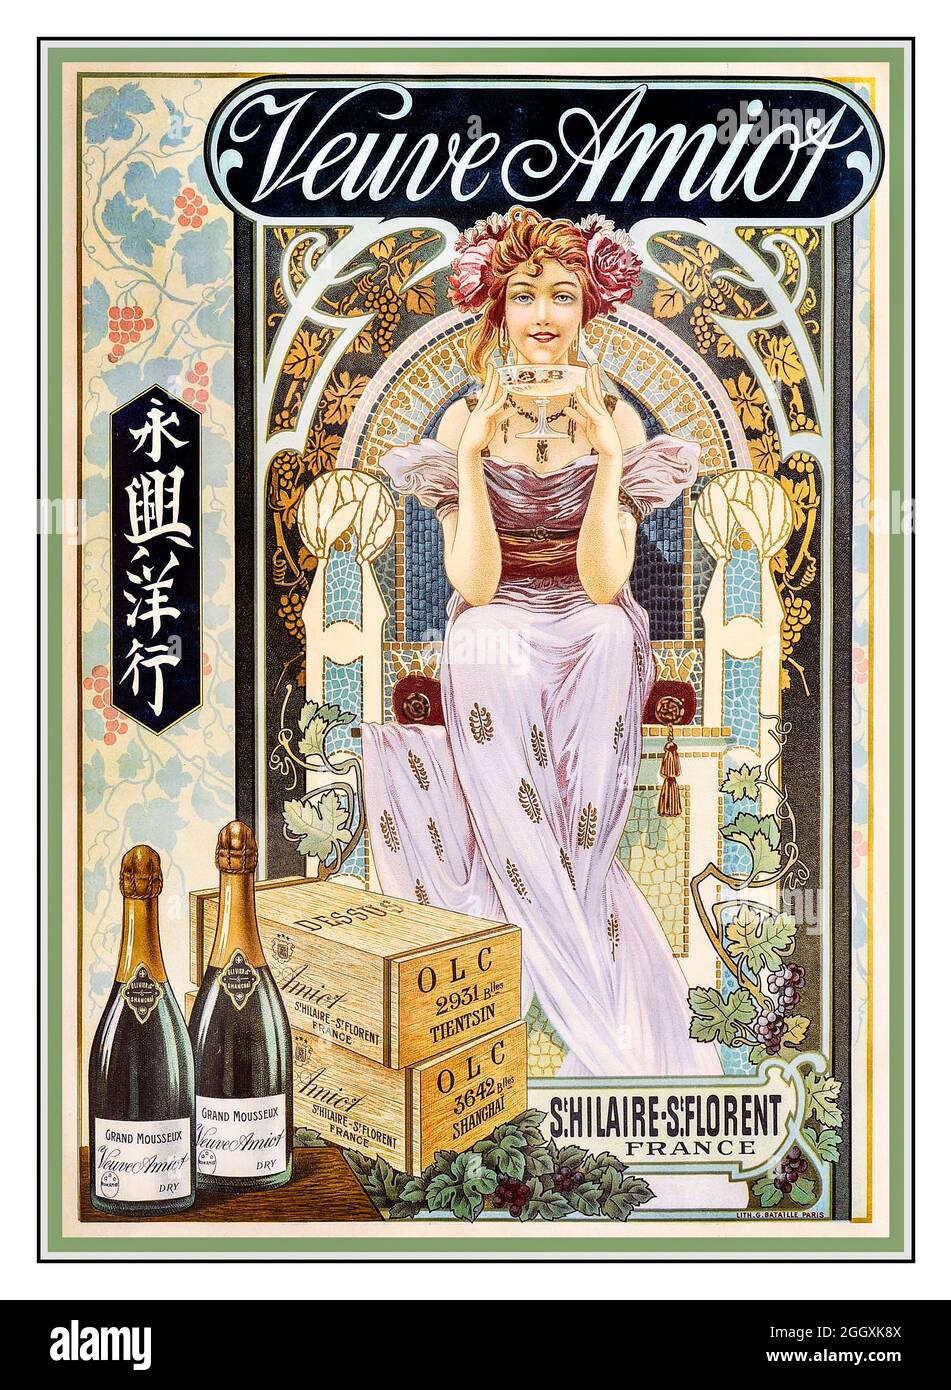 Vintage 1900s Sparkling Wine Cremant Poster 'Veuve Amiot' bottled and packaged for Shanghai China art nouveau color lithographic poster For large Veuve Amiot sparkling wines intended for export to Shanghai. Artwork lithograph by G Bataille Paris 1900s Cremant Sparkling Wine Poster 'Veuve Amiot' bottled and packaged for Shanghai China Stock Photo